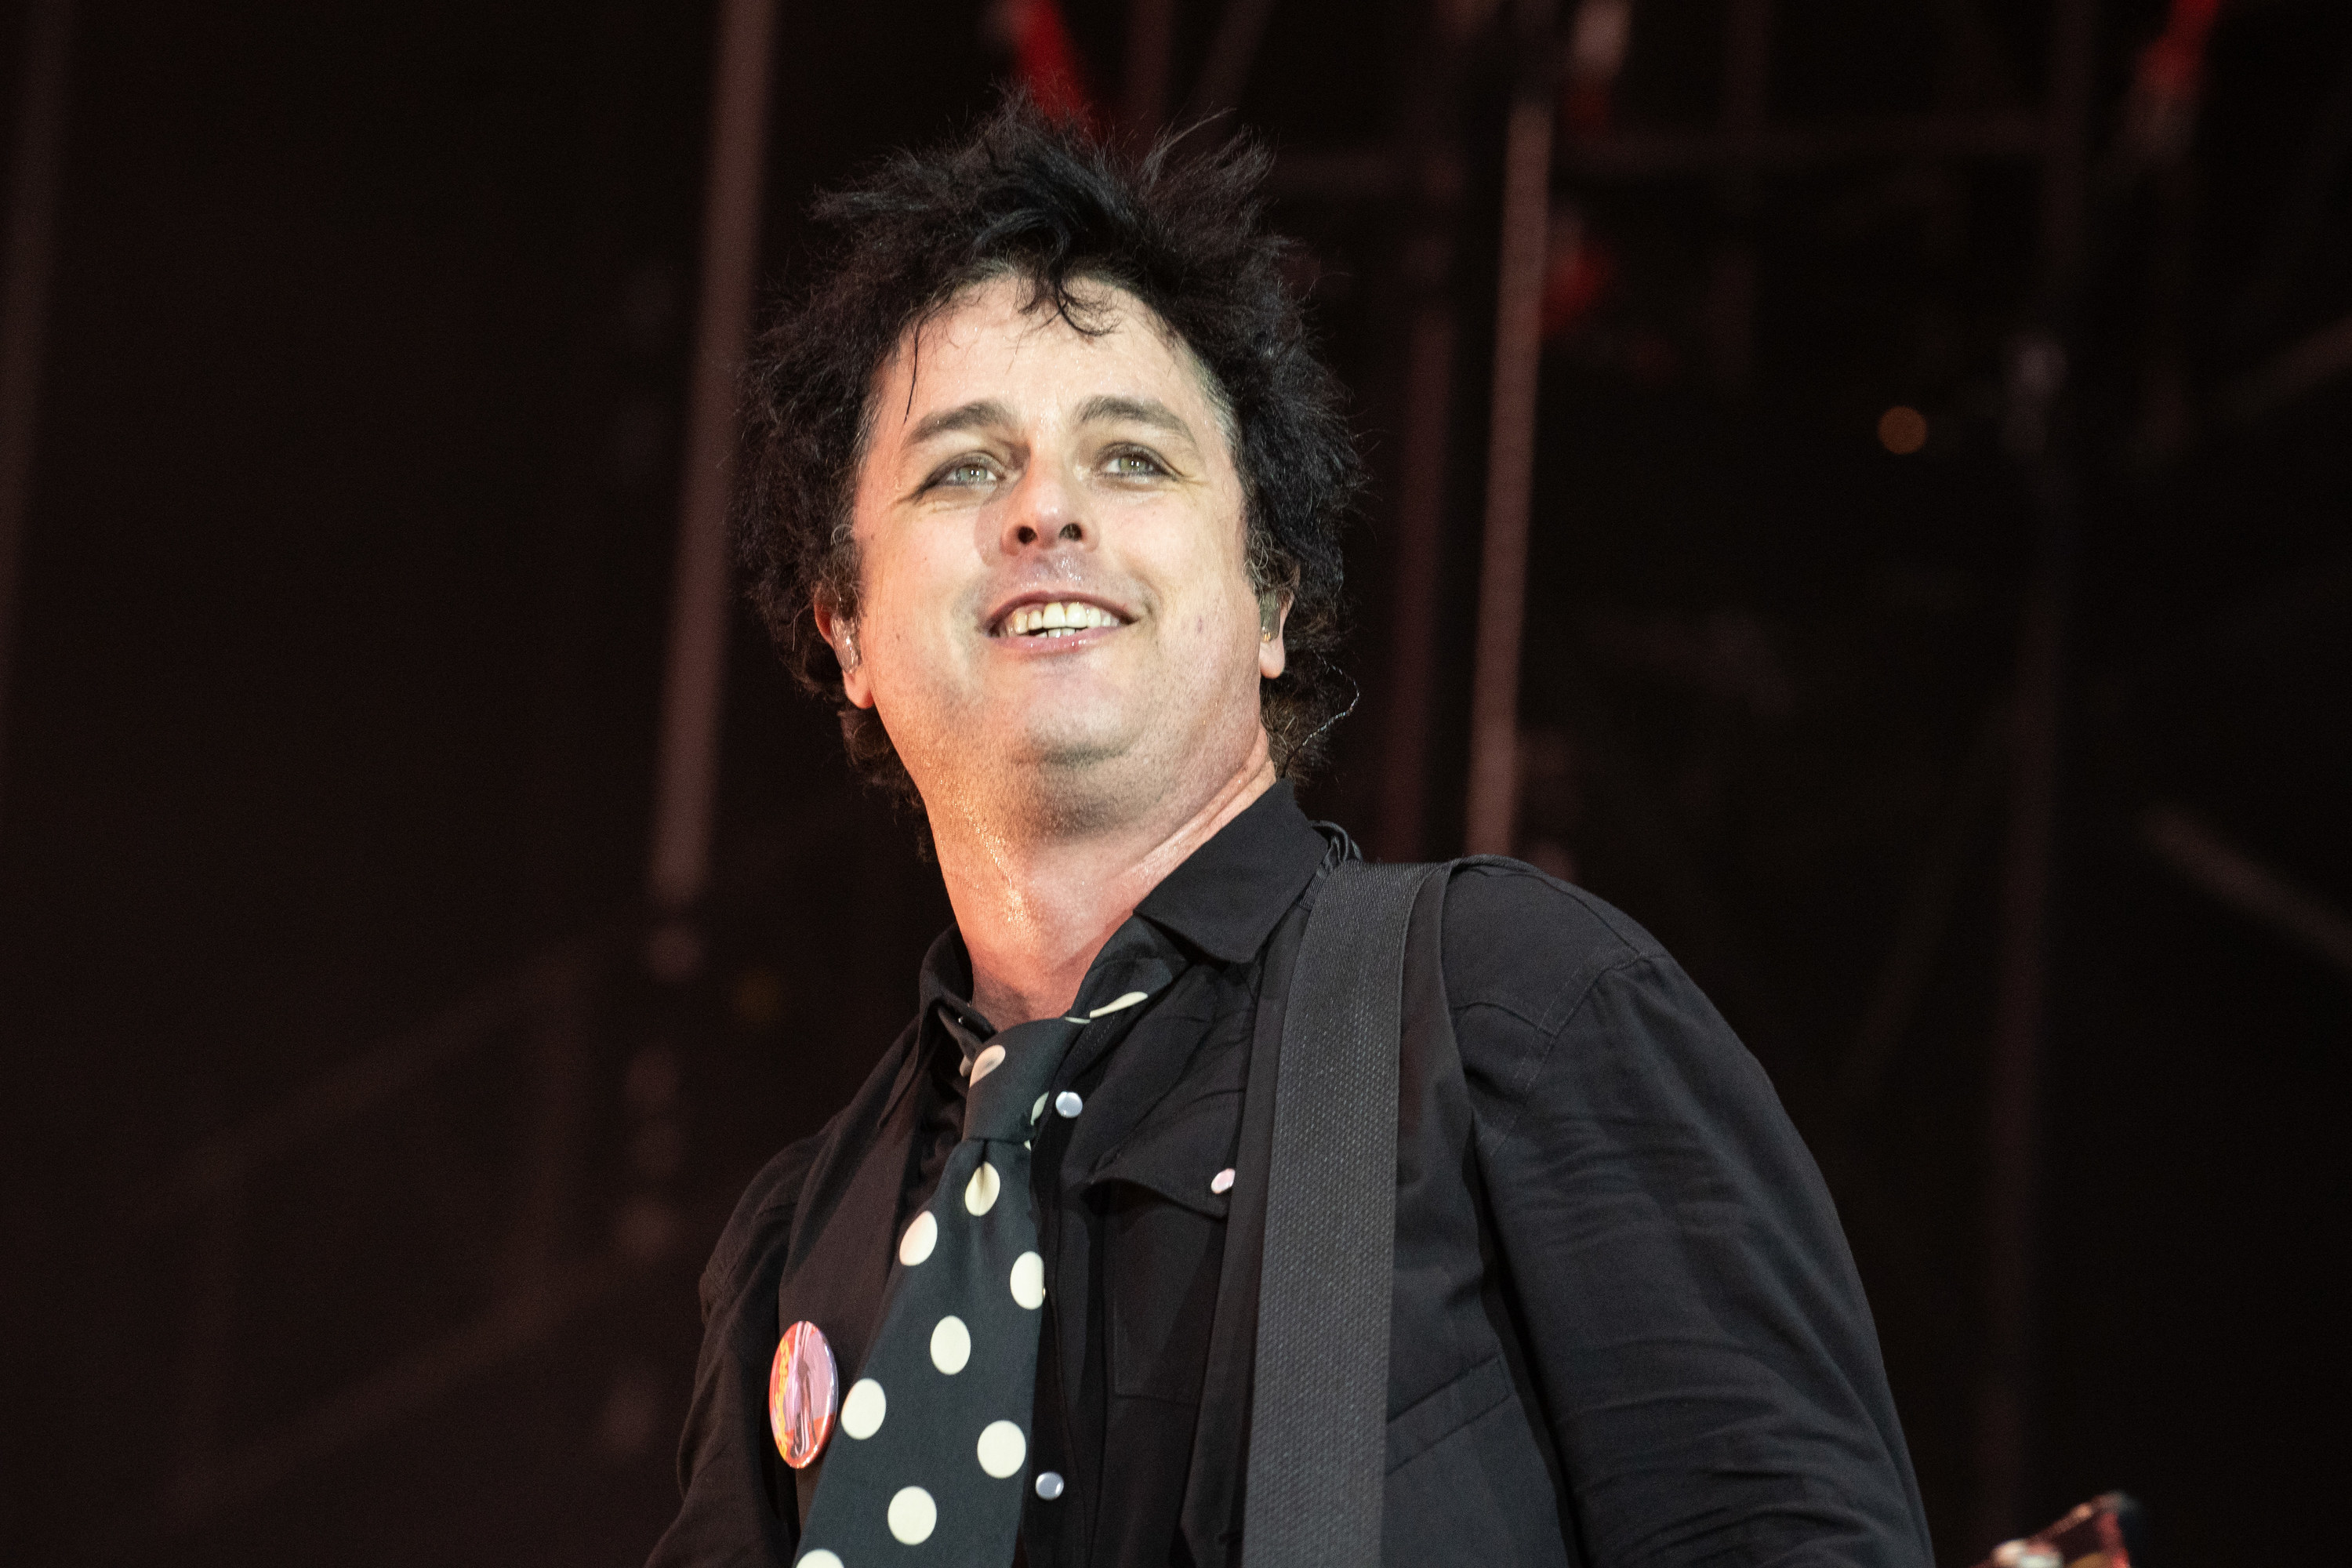 Billie Joe Armstrong performs at a concert in Milan on June 15th, 2022